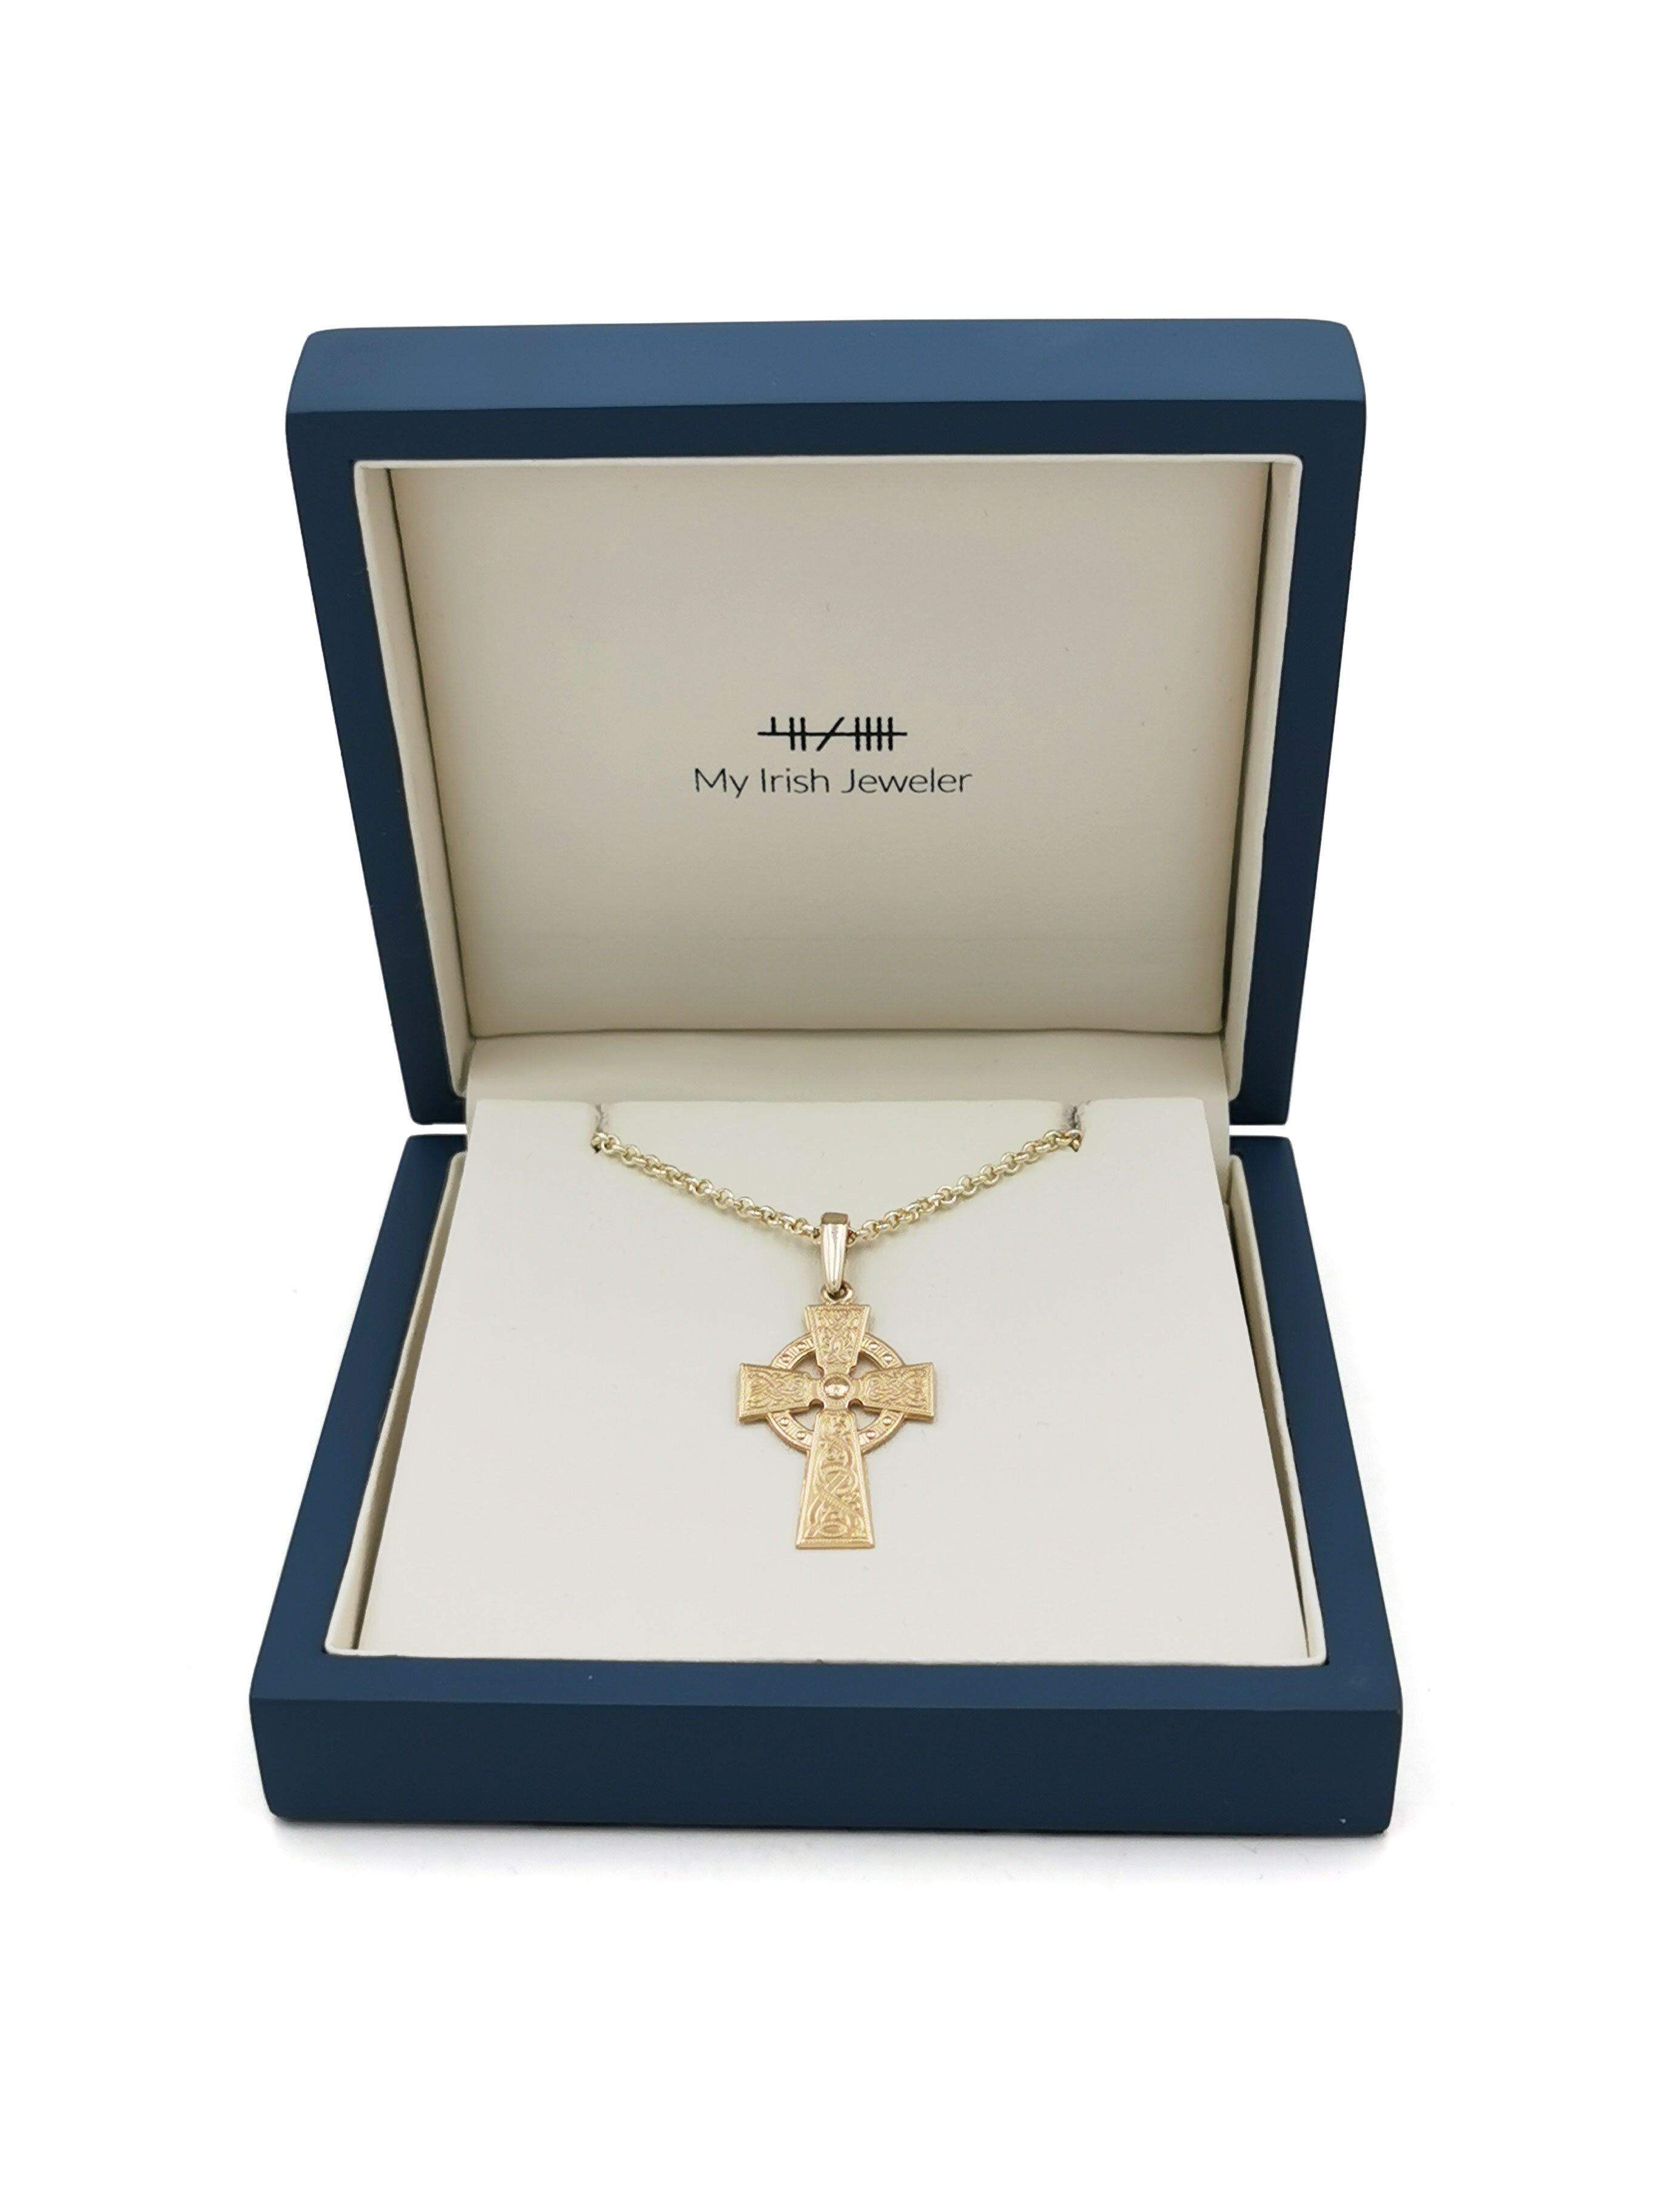 Buy Children's 14K Gold-plated Infinity Cross Pendant Necklace, Girls First  Holy Communion Gift, Kids Gold Cross Charm Necklace, Confirmation Online in  India - Etsy